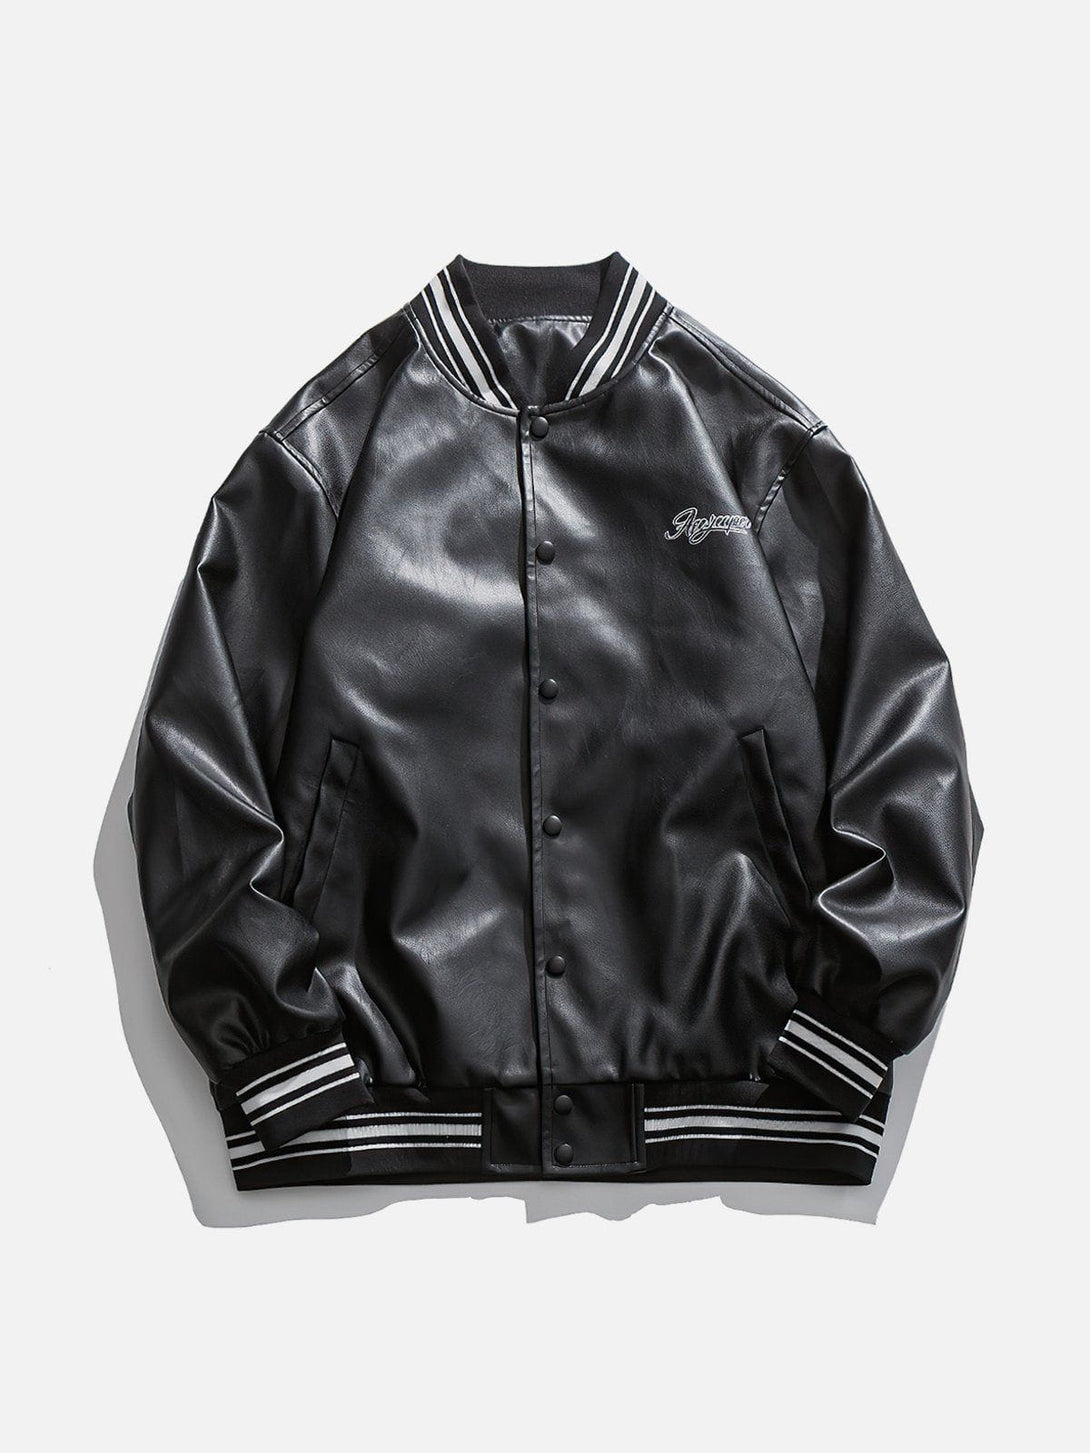 Levefly - 3D Letter Embroidery Jacket - Streetwear Fashion - levefly.com